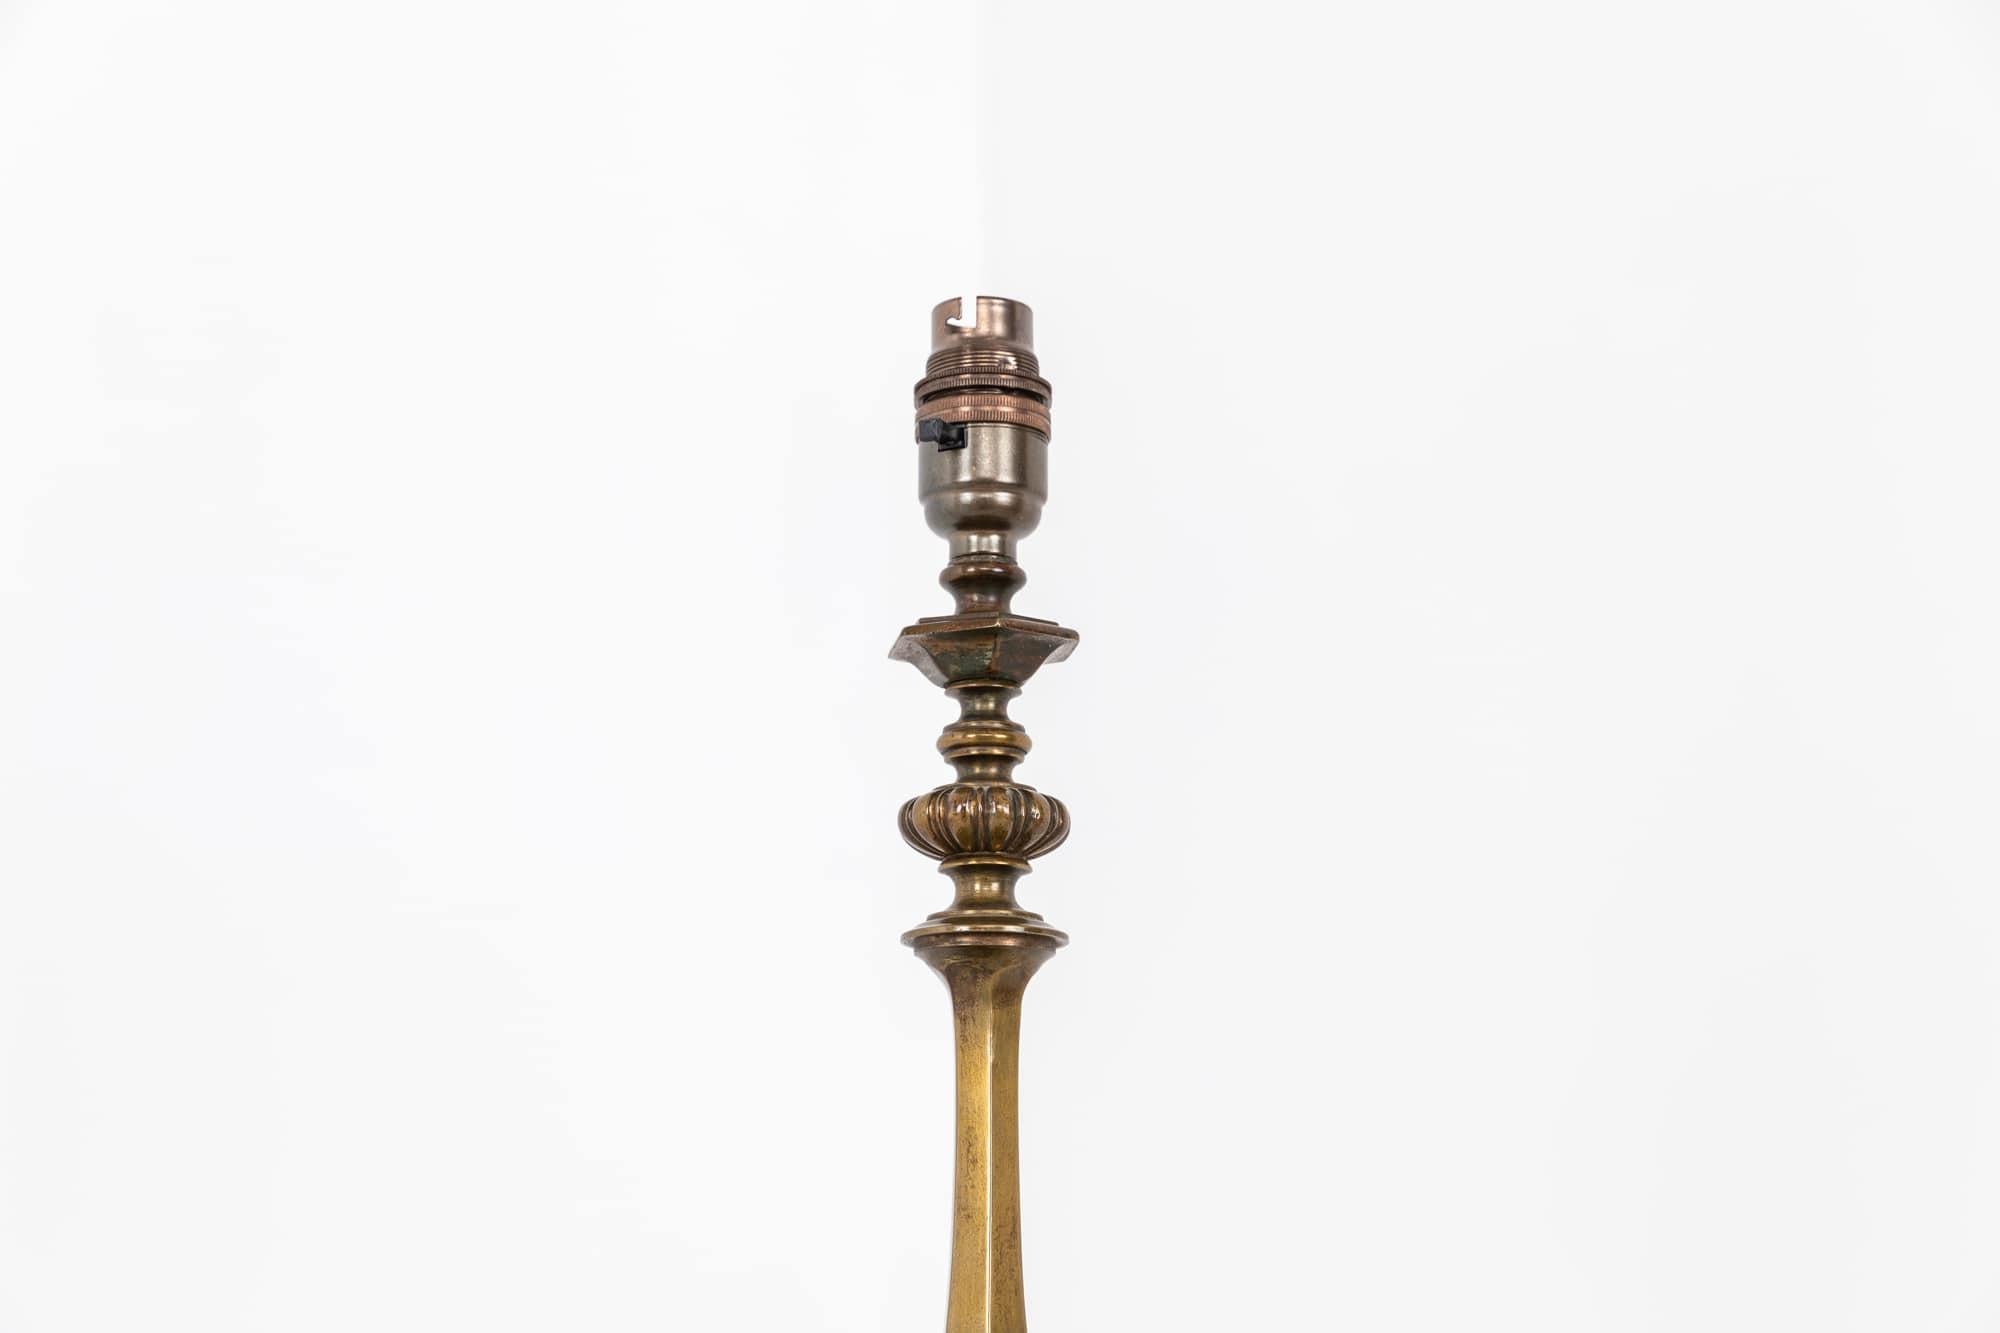 

A very attractive Edwardian brass table lamp. c.1910

Of high quality, heavy brass construction with beautiful aged patina.

Rewired with 2m of black twisted flex and BS 3-pin plug.
